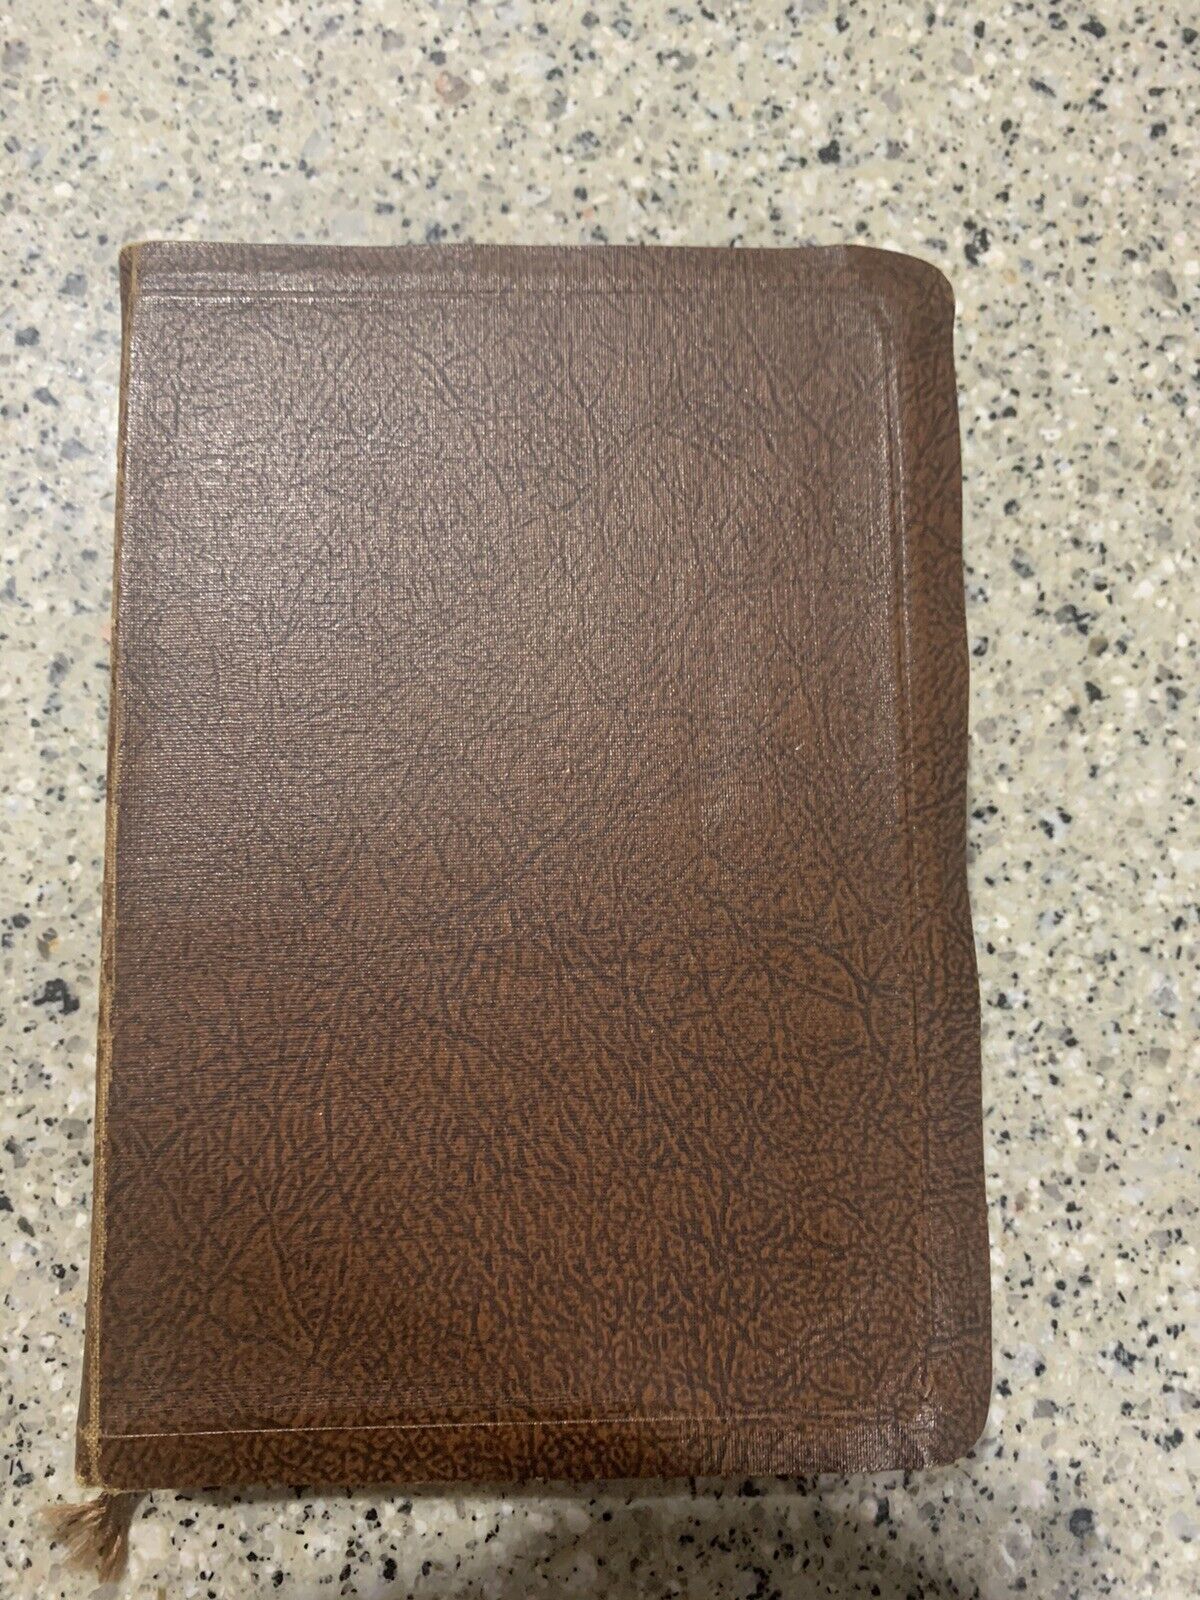 Vintage Illustrated Bible Cambridge Brown Leather Cover 1970's See Description